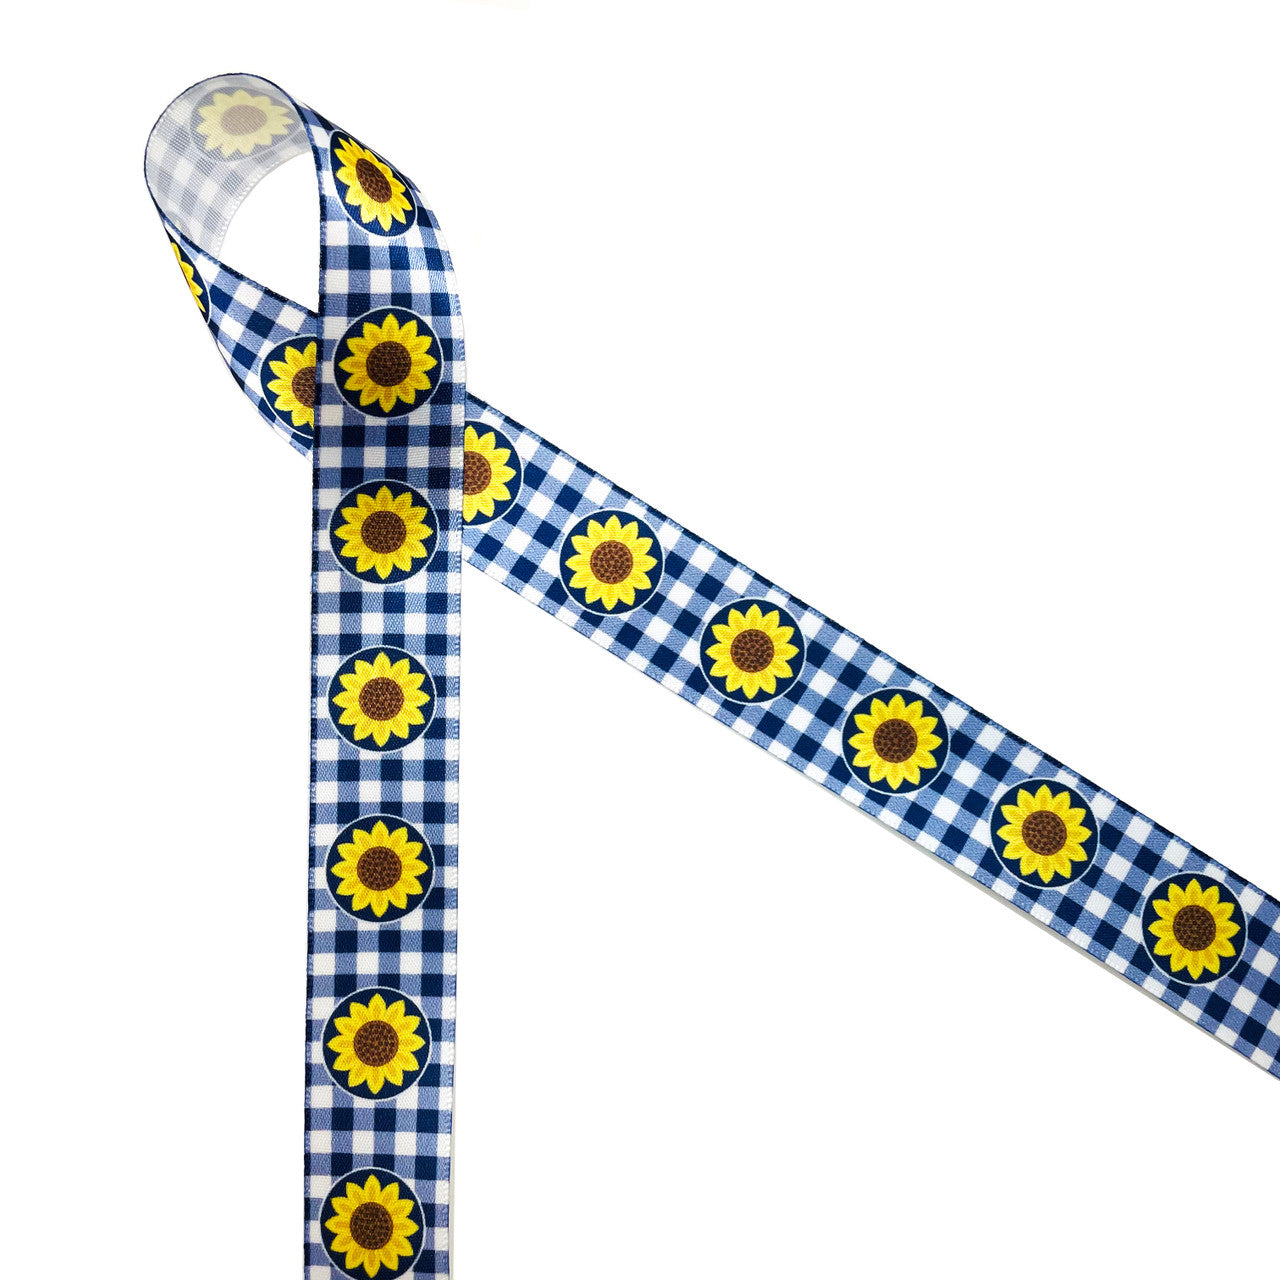 Yellow sunflowers in a row on a navy blue gingham background printed on 7/8" white grosgrain ribbon is the ideal Summer crafting ribbon supply! This is a perfect ribbon for hair bows, head bands, wreath making, gift wrap and party decor. Be sure to have this ribbon on hand for quilting and sewing projects too! All our ribbon is designed and printed in the USA